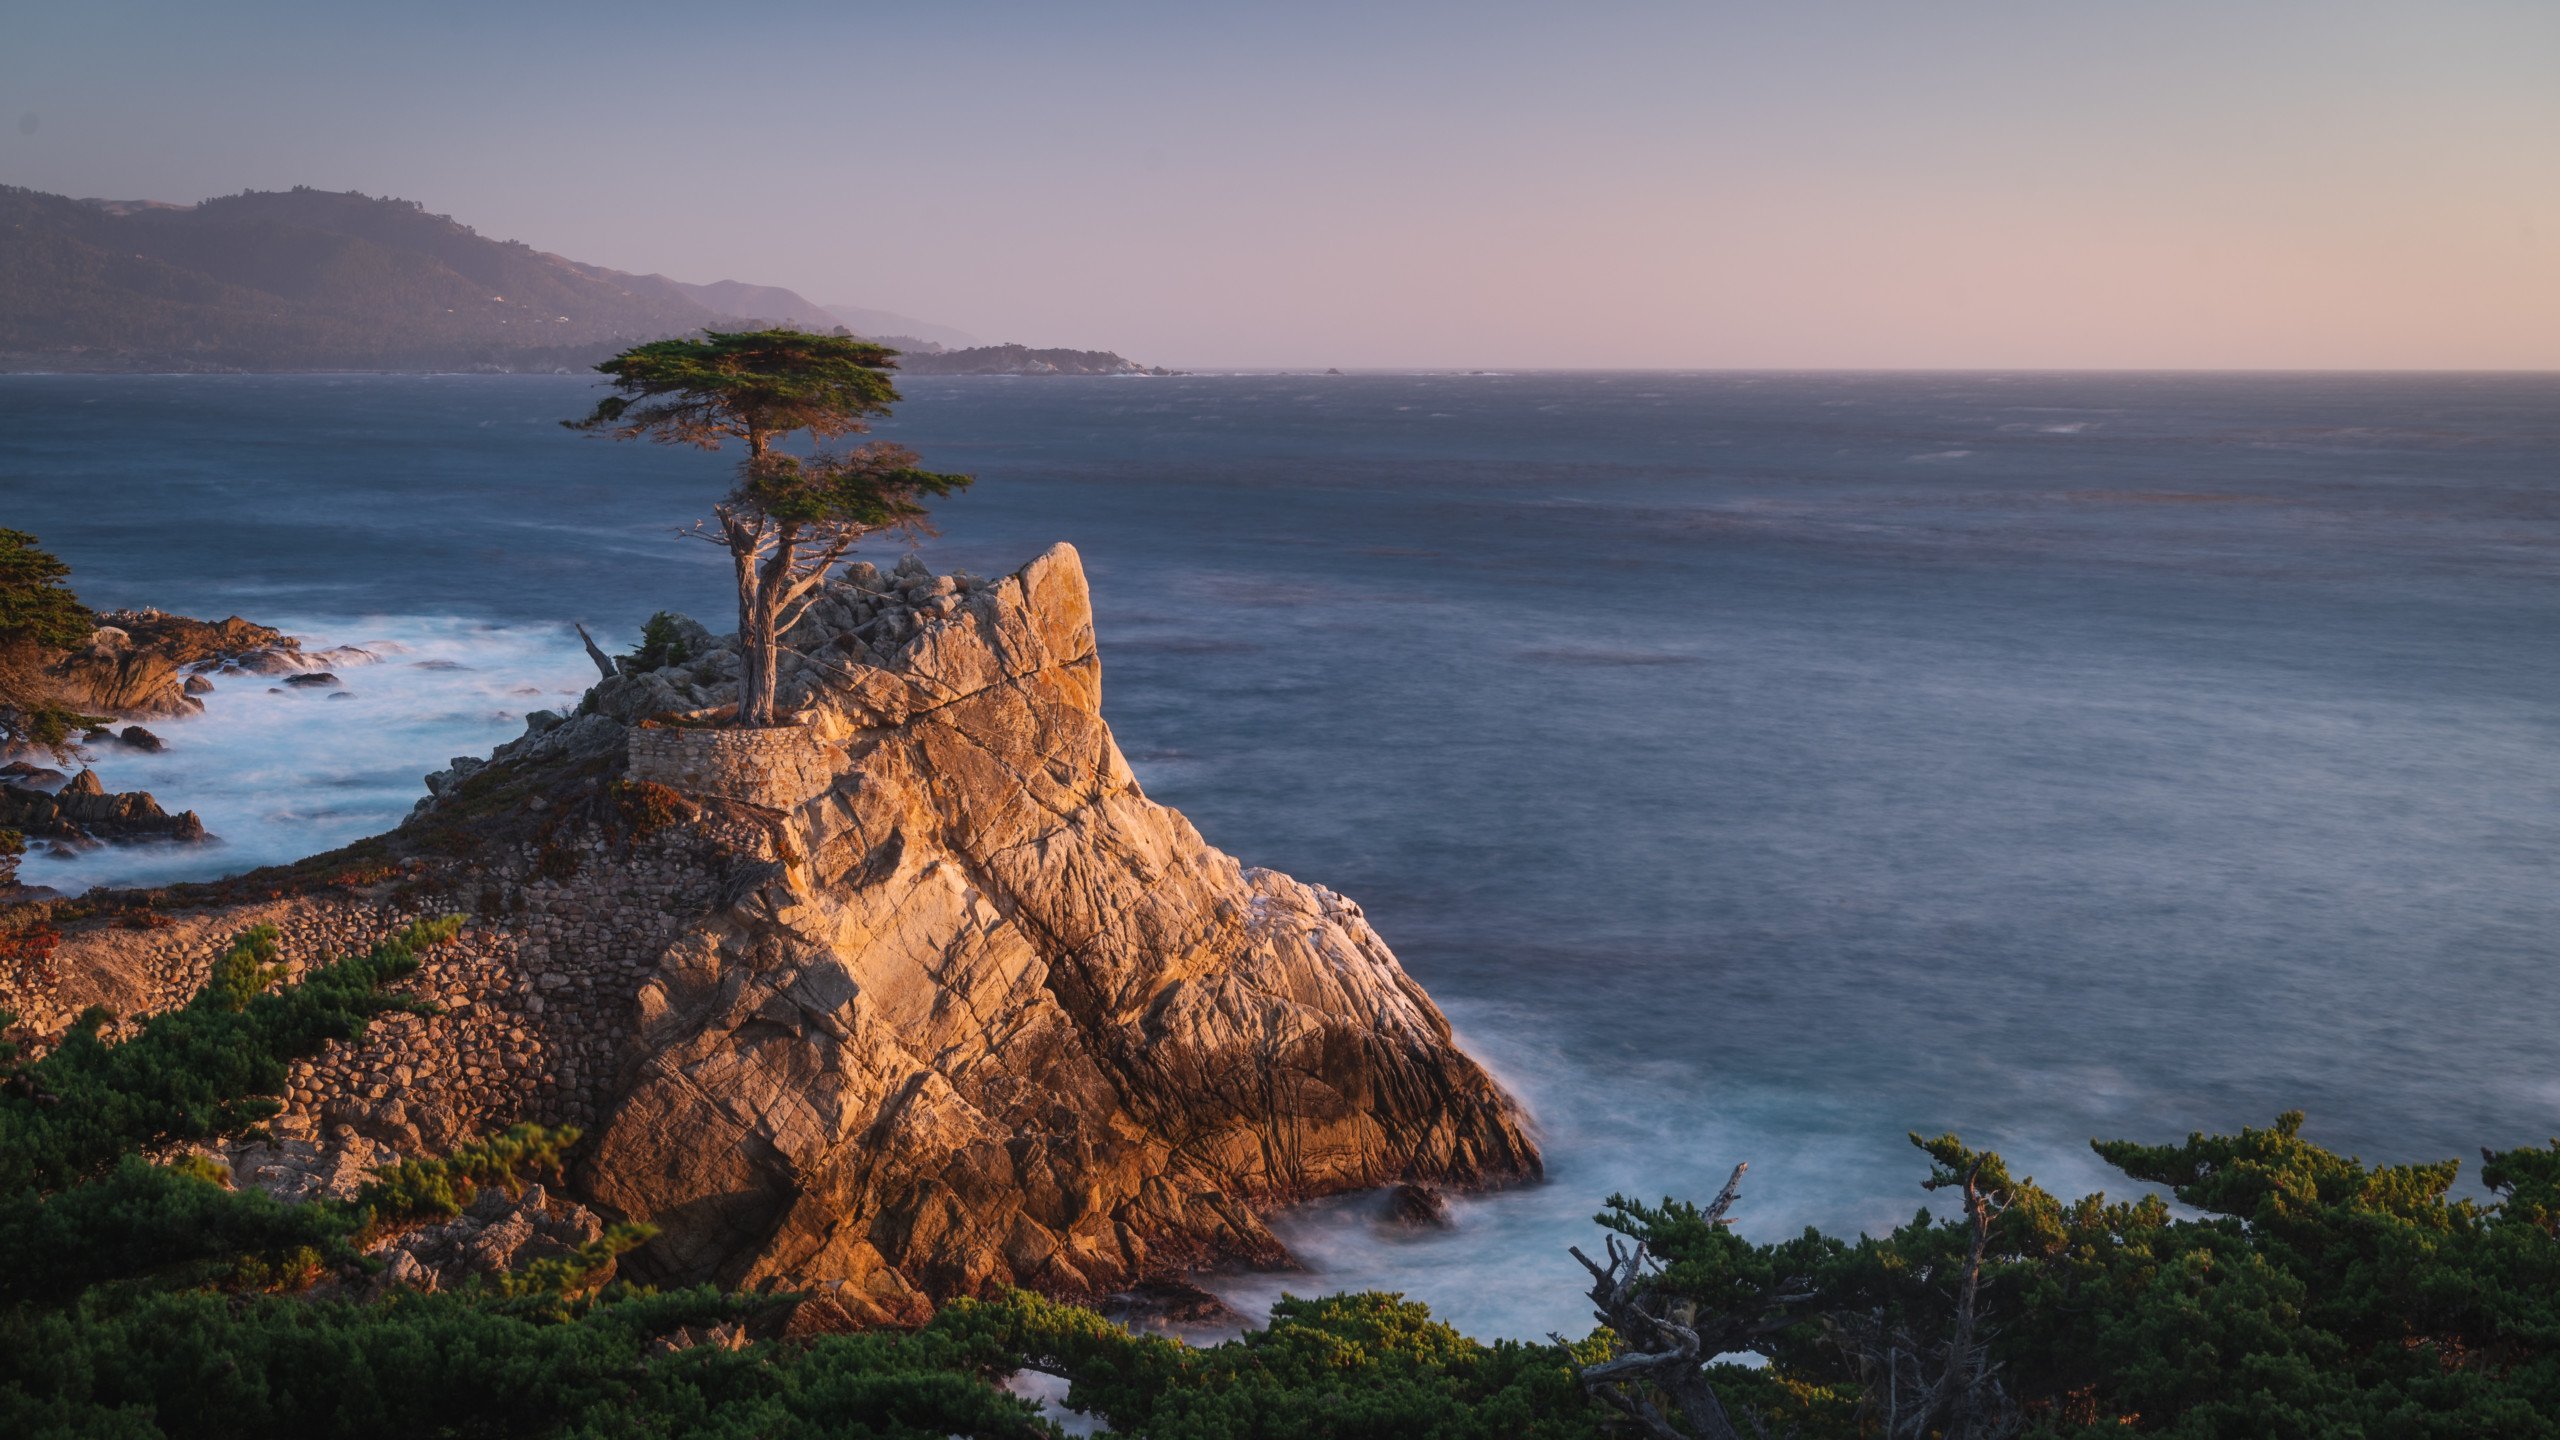 In Defiance Of Apple, This Is A Nature Themed MacOS Monterey Wallpaper